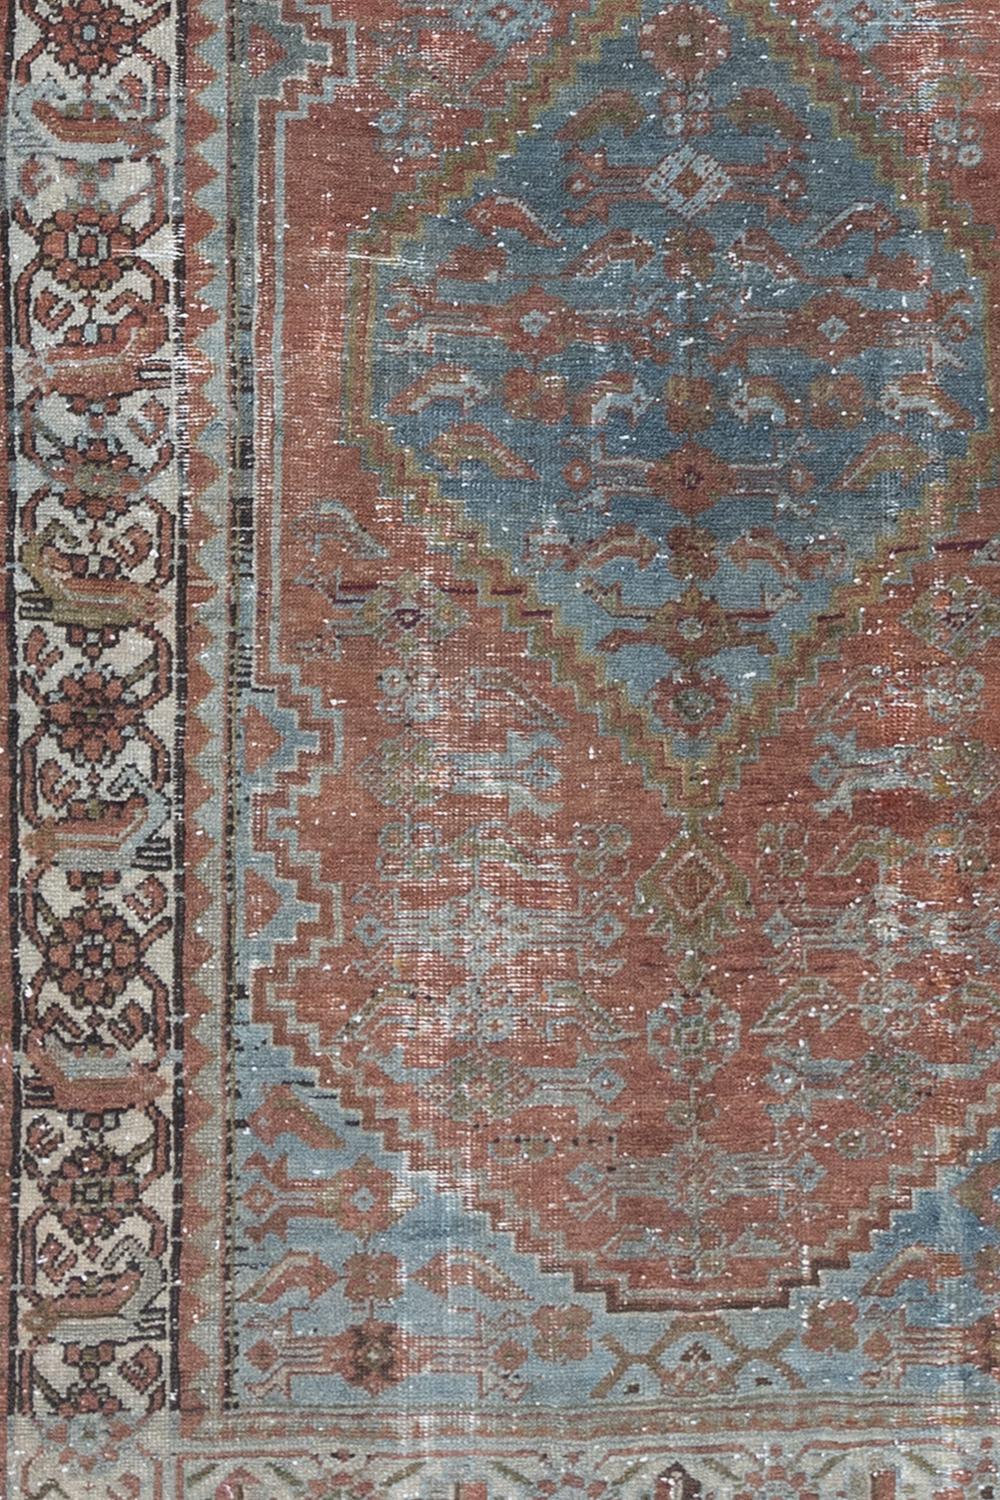 Age: Circa 1920

Colors: salmon, rust, blue, green

Pile: low

Wear Notes: 4

Material: wool on wool

Antique Persian Mahal woven in the early 20th century. 

Vintage rugs are made by hand over the course of months, sometimes years.